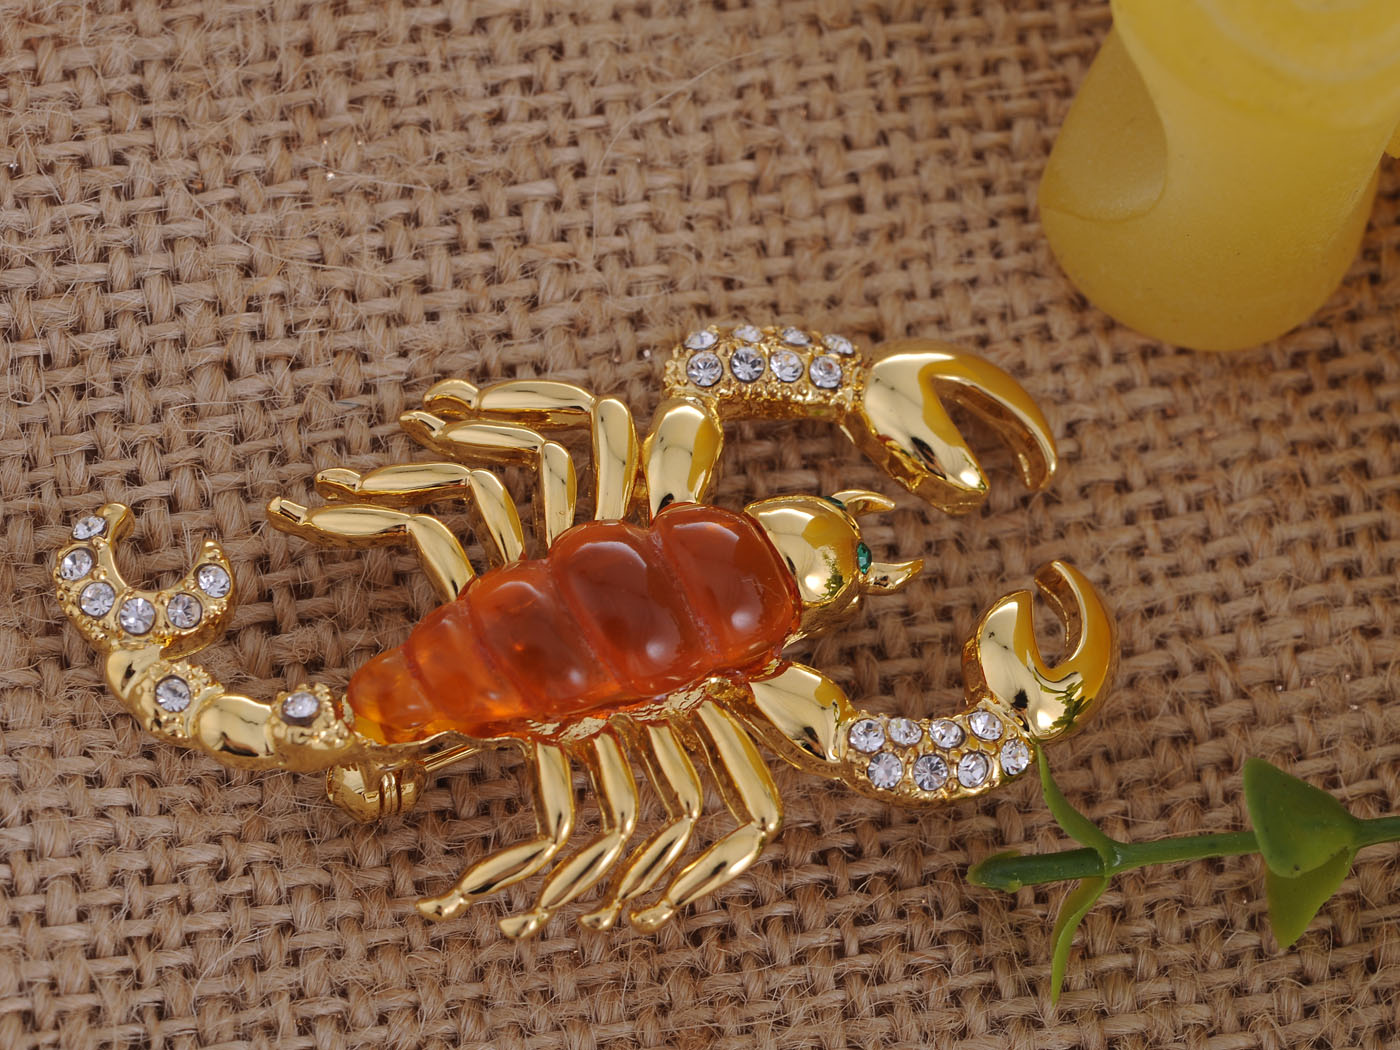 Scorching Desert King Insect Scorpion Pin Brooch